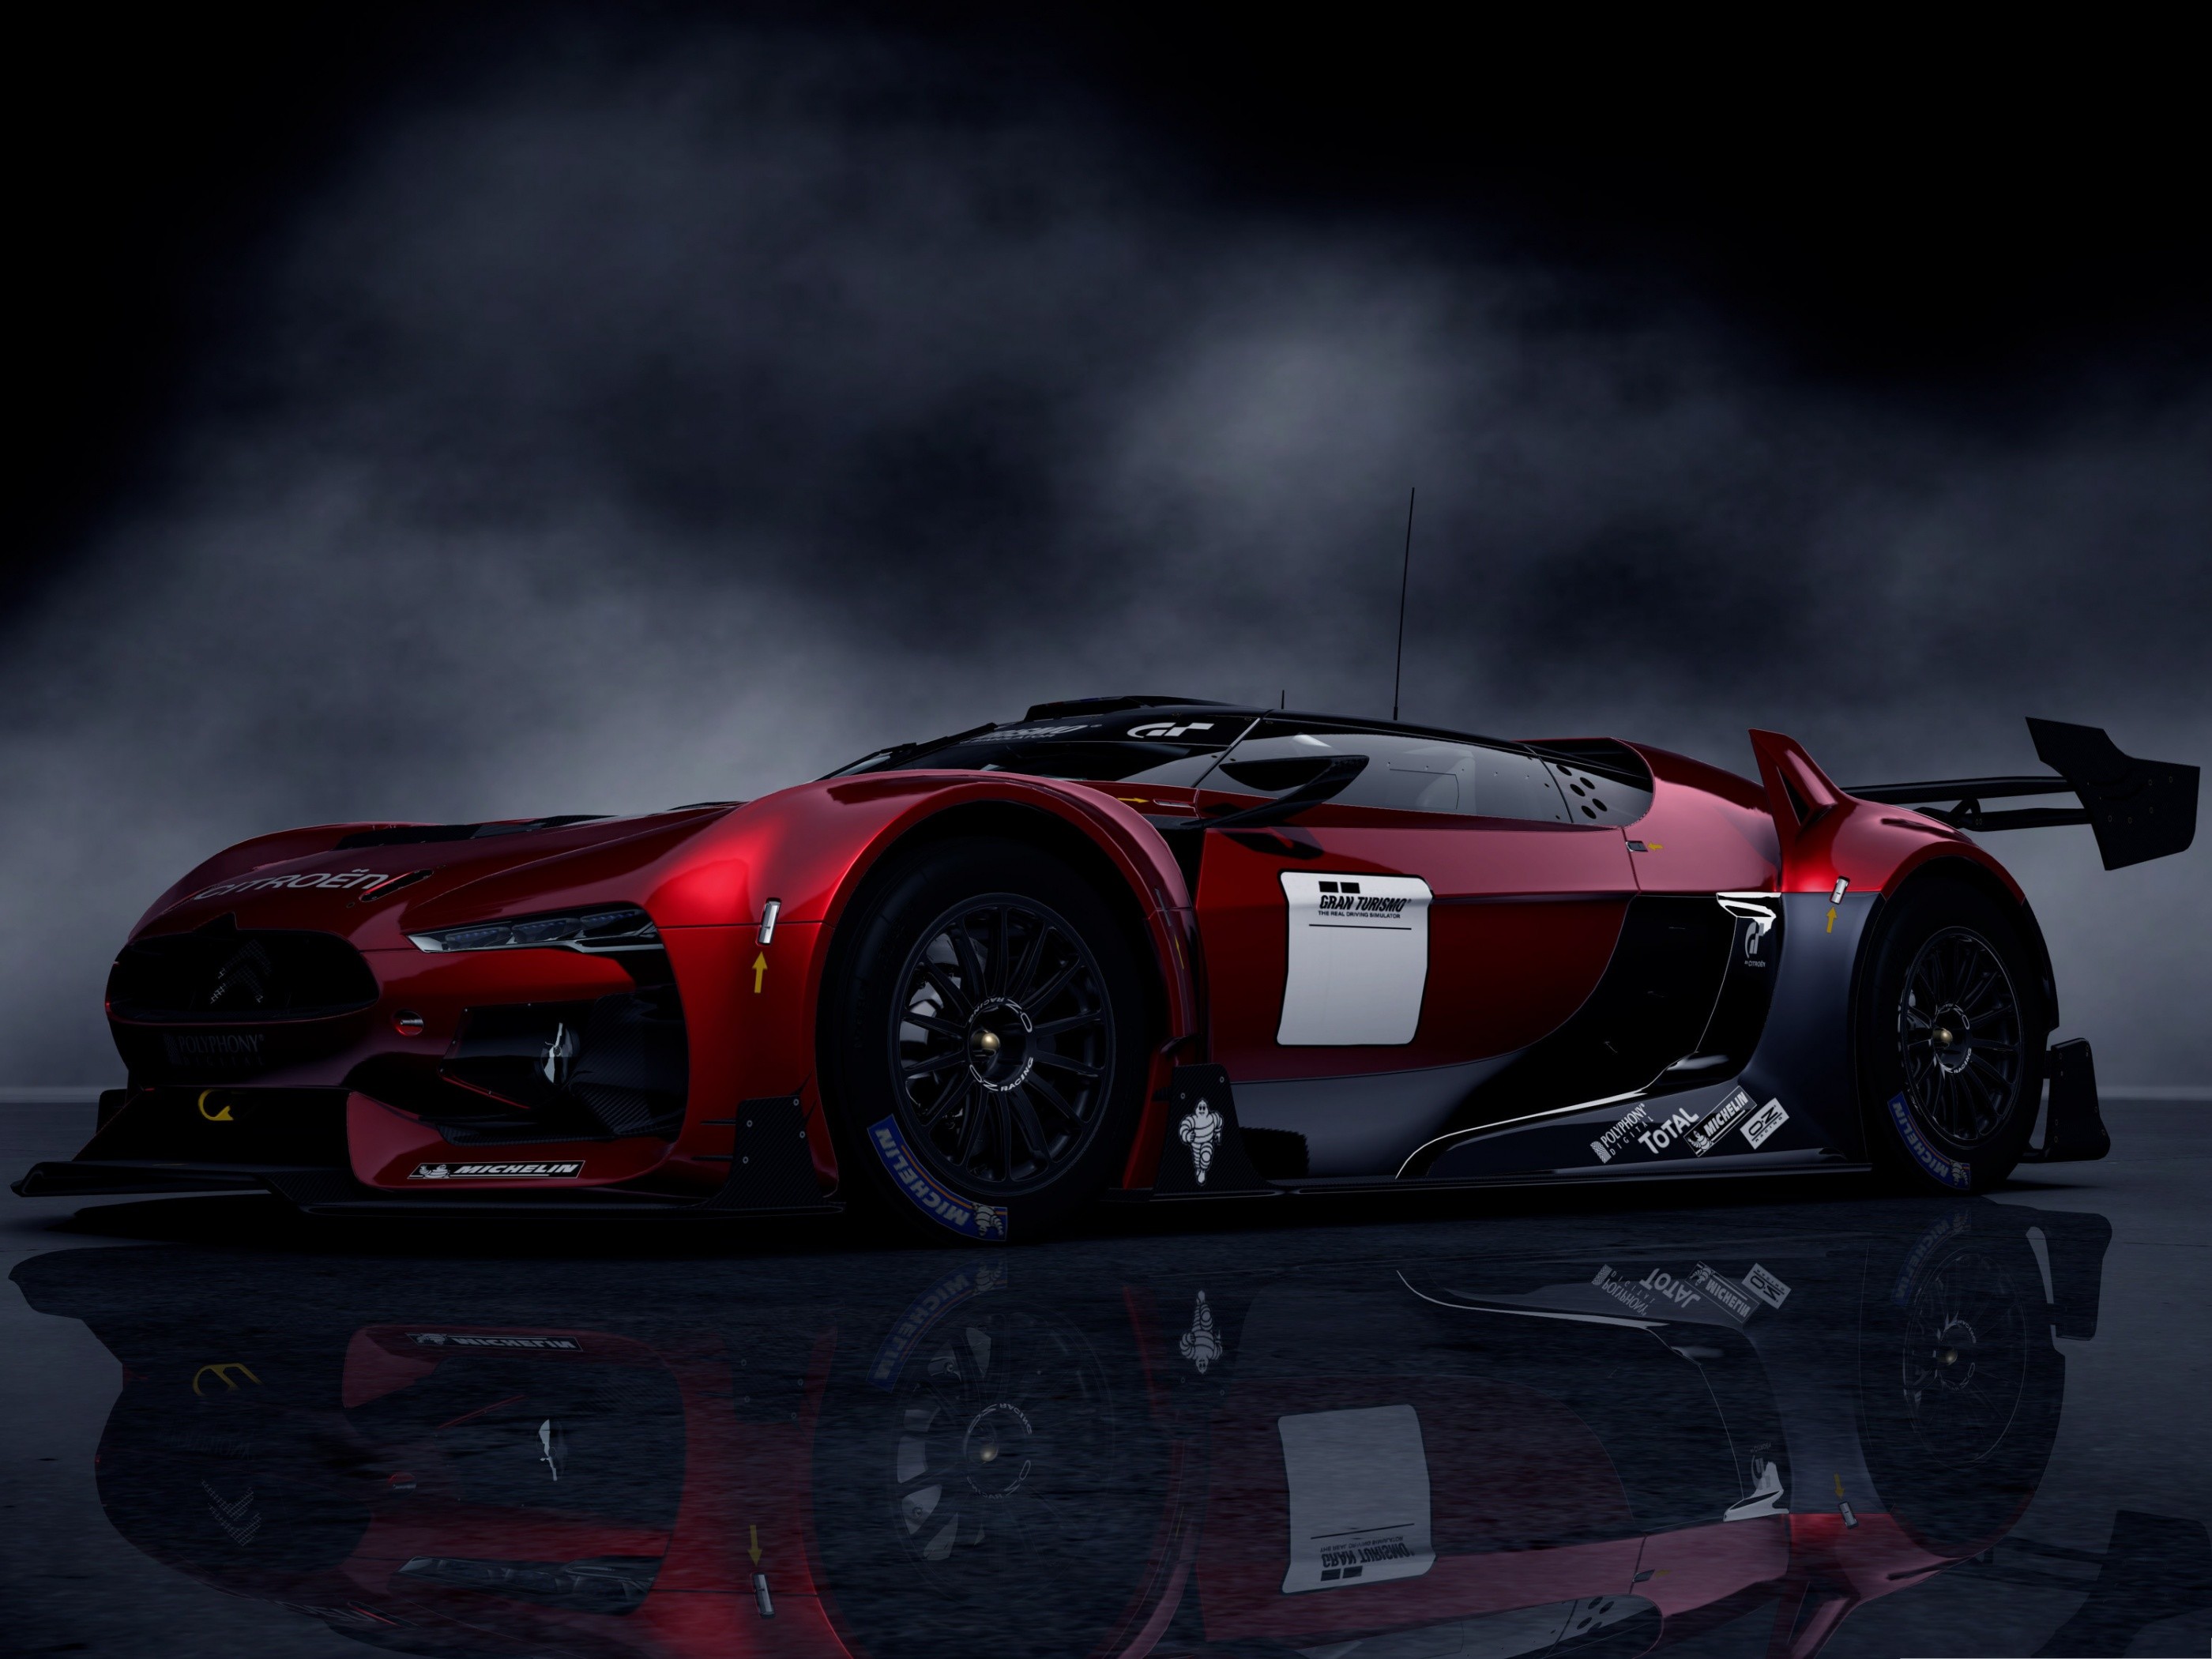 2800x2100 click to free download the wallpaper--Free Cars Wallpaper, Red Citroen GT on